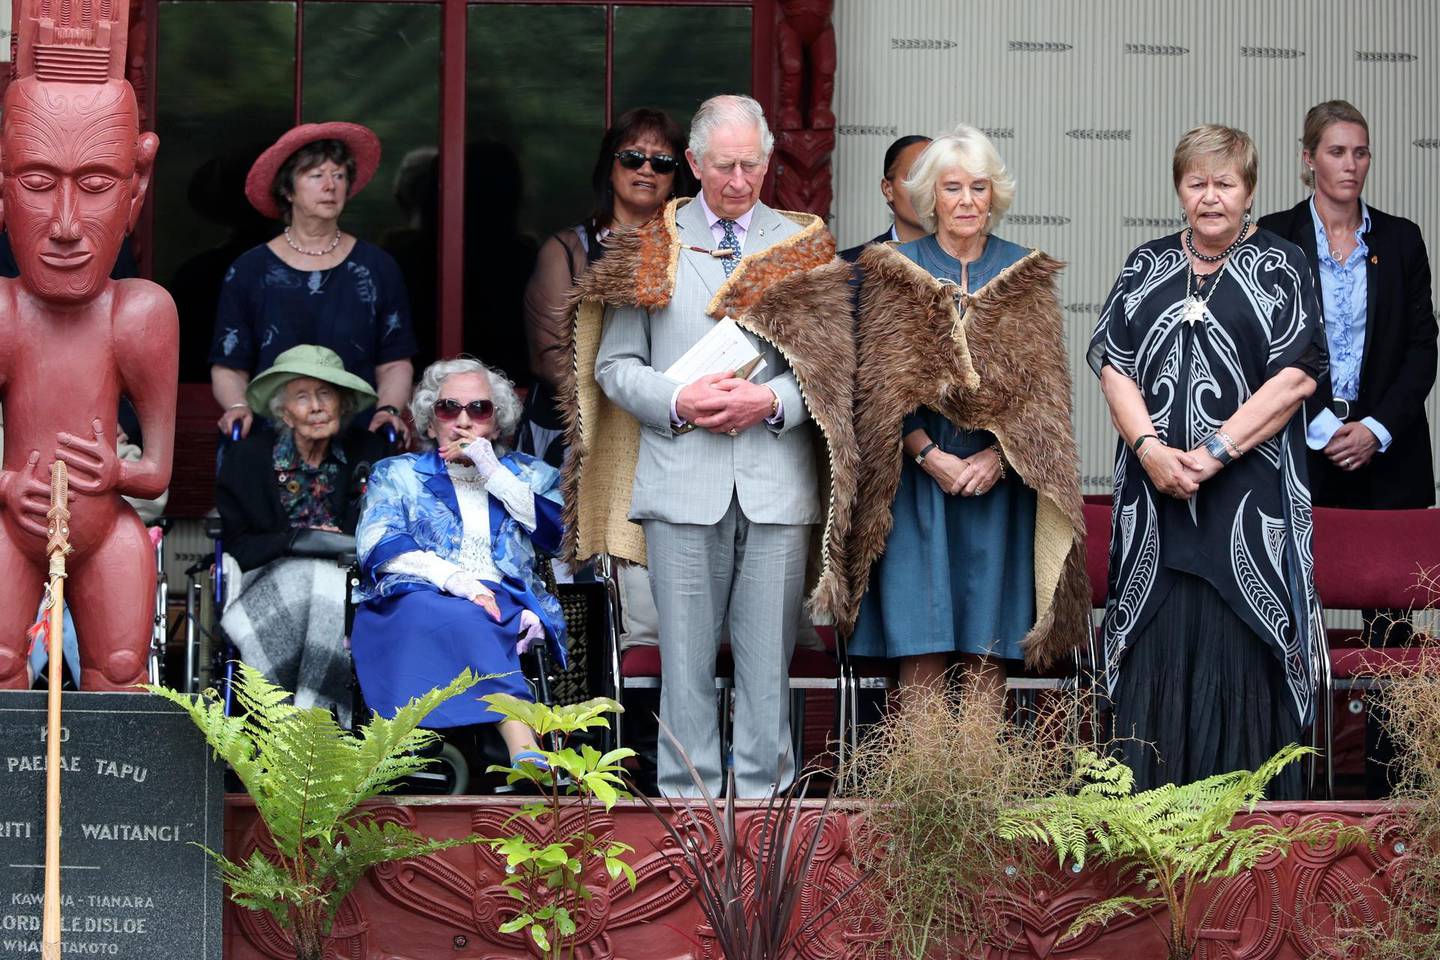 Britain's Prince Charles, center, and his wife Camila stand during a ceremony at Waitangi in New Zealand, Wednesday, Nov. 20, 2019. The couple visited  the historic Waitangi Treaty Grounds, where the nationâ€™s founding document was signed. It is the first visit there by a member of the British royal family in 25 years. (John Stone/Pool Photo via AP)